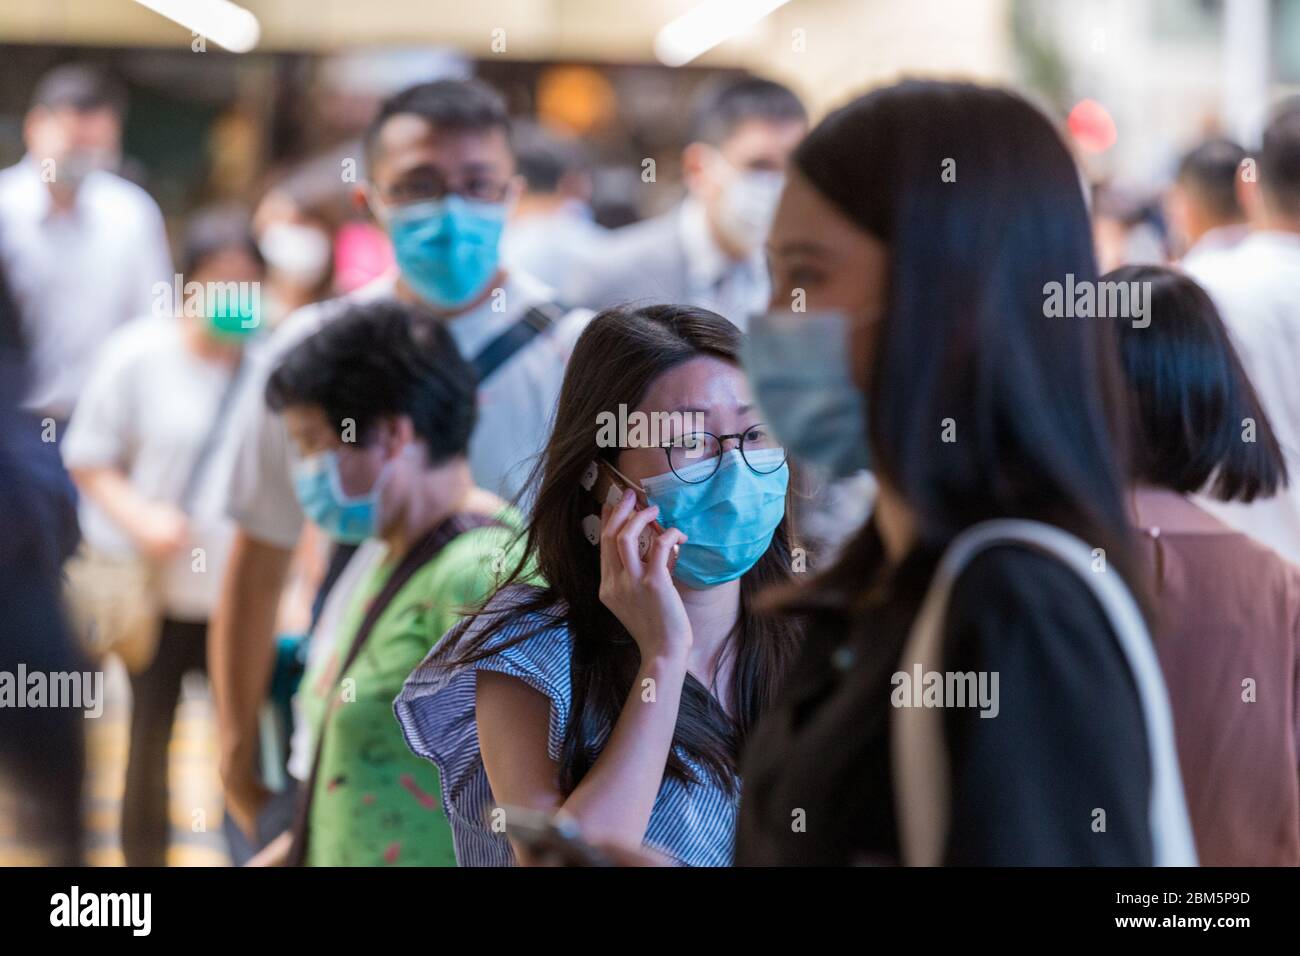 Hong Kong, Hong Kong. 7 May, 2020 Hongkongers wear surgical masks on the streets, amid the coronavirus pandemic. Today is the last day before the HK Government lifts some of the public restrictions. Hong Kong has now had a run of no locally transmitted infections for 18 days. Credit: David Ogg/Alamy Live News Stock Photo